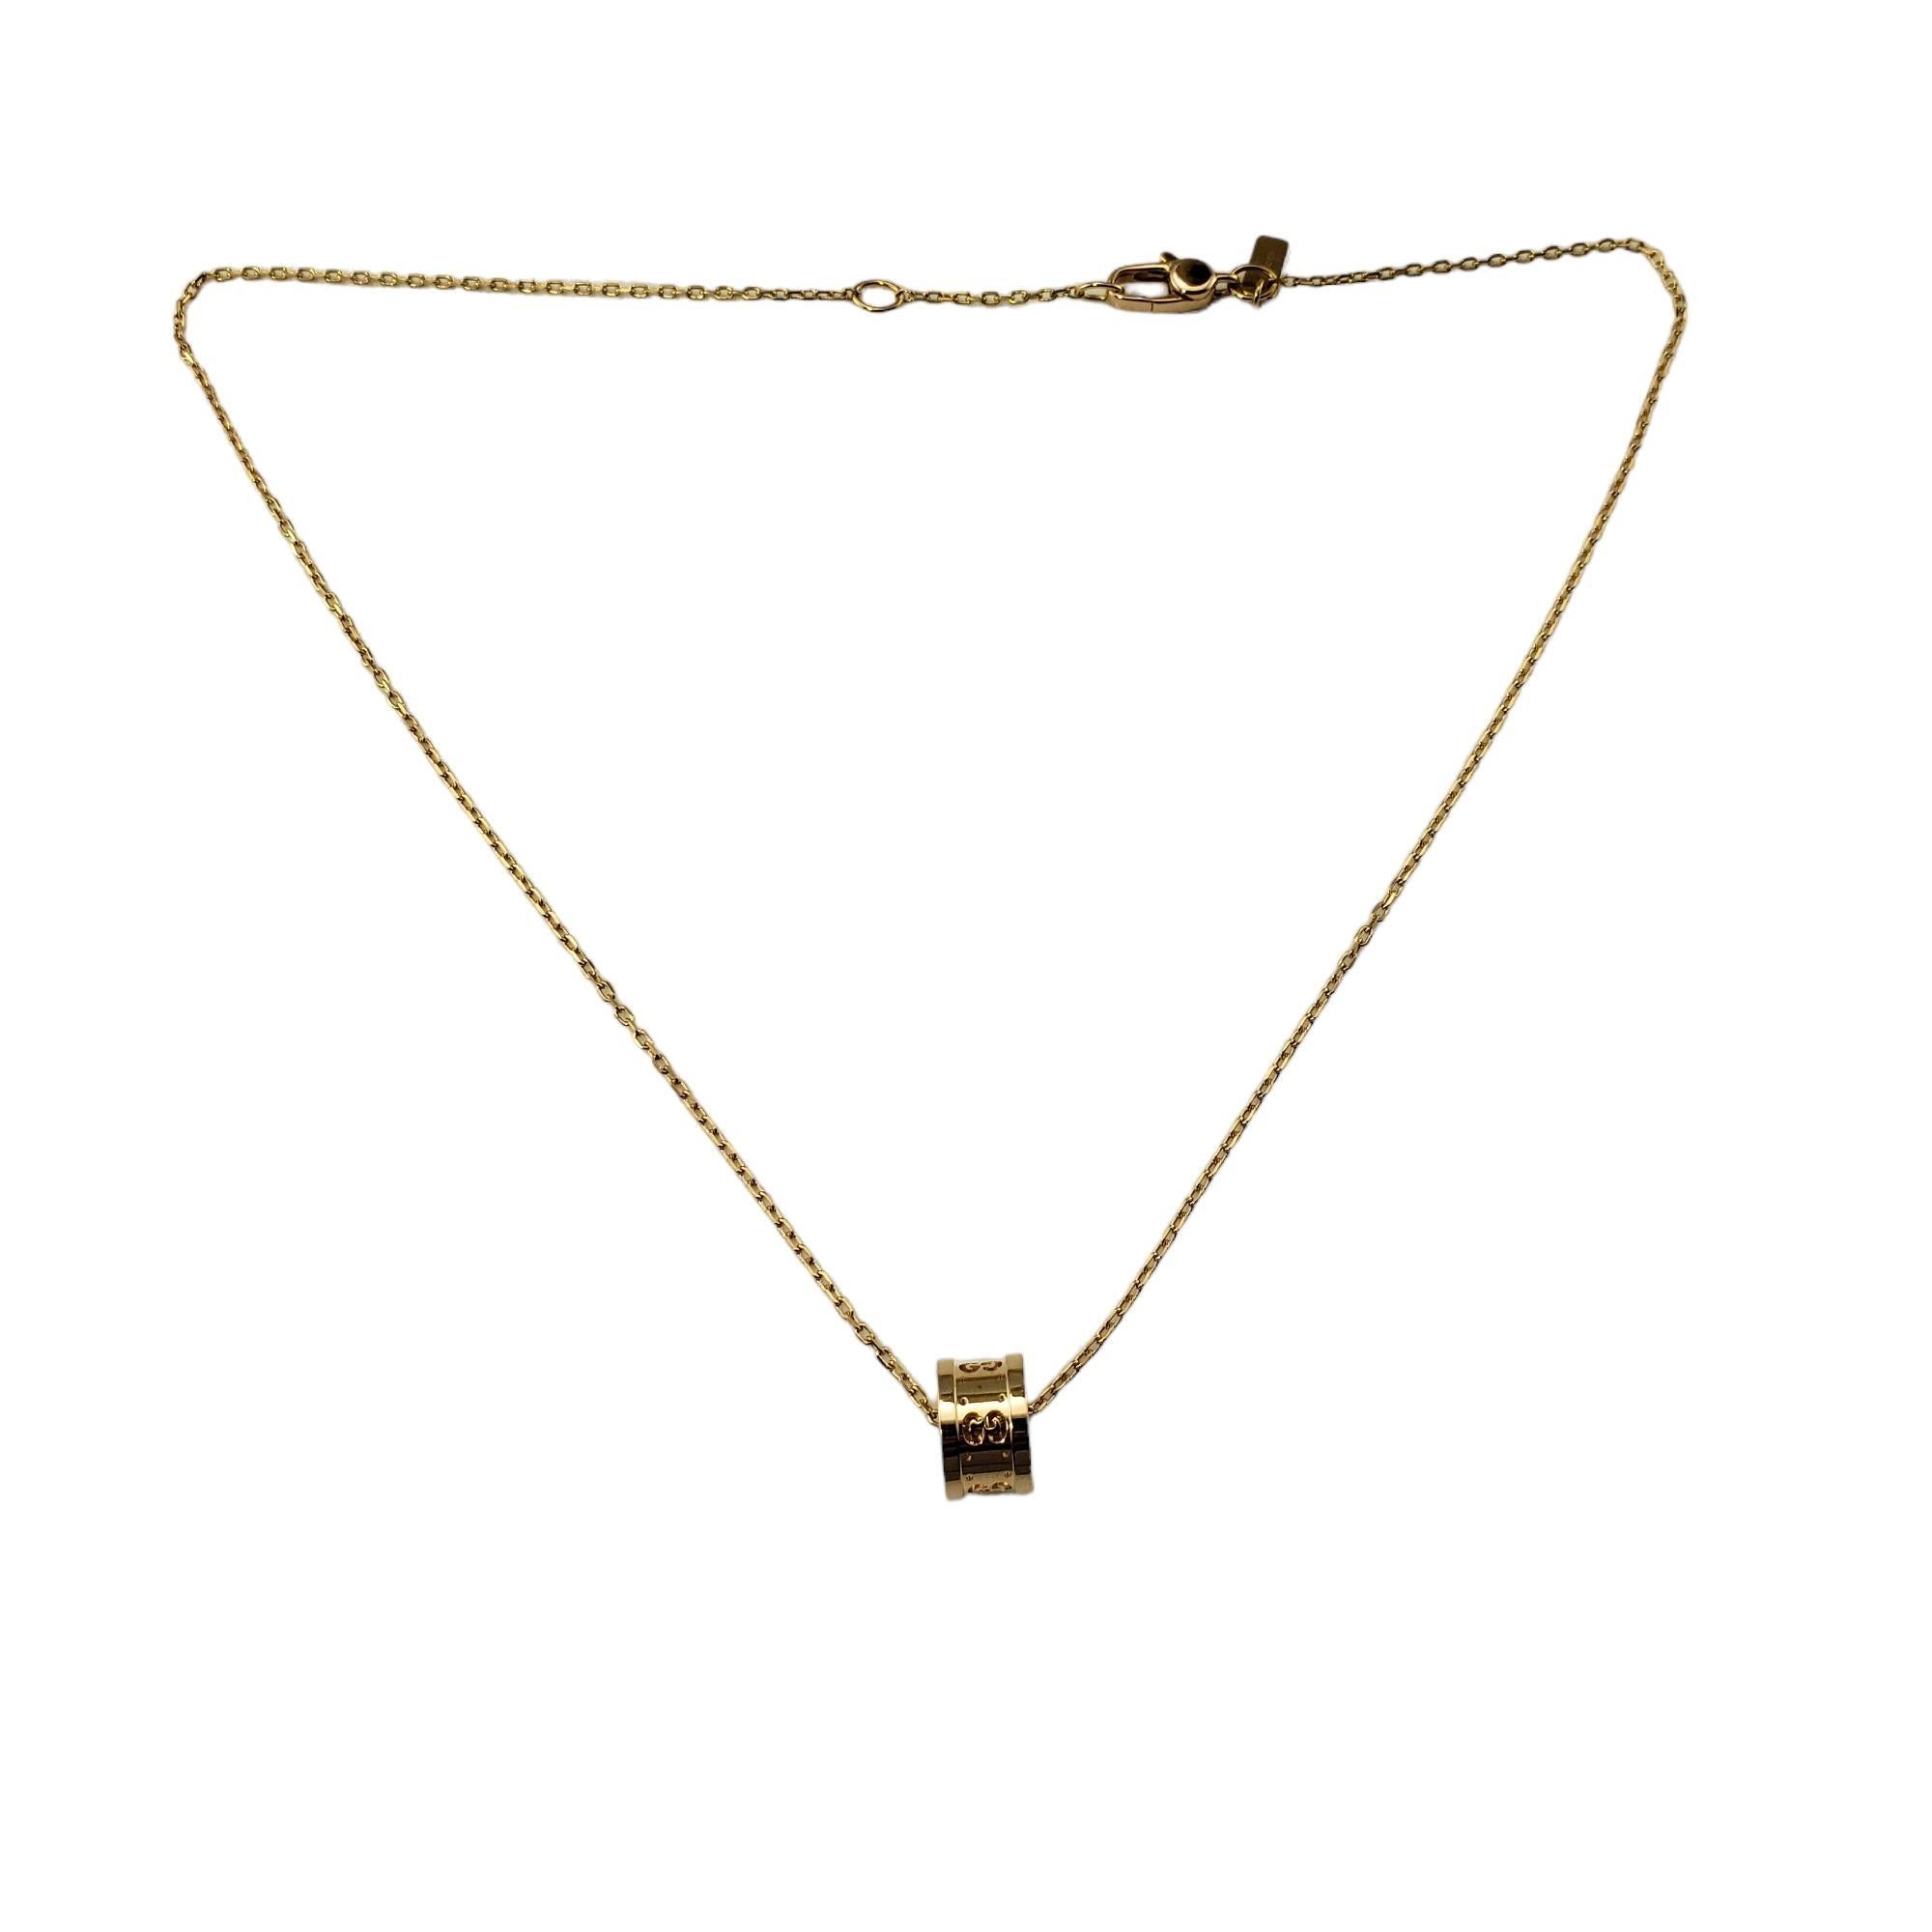 Gucci 18K Yellow Gold Icon Twirl Pendant Necklace-

This elegant Gucci piece features a signature GG barrel pendant suspended from a polished 18K yellow gold necklace.

Size:  16.5 mm (necklace)
          10 mm x 10 mm (pendant)

Hallmark:  Gucci 